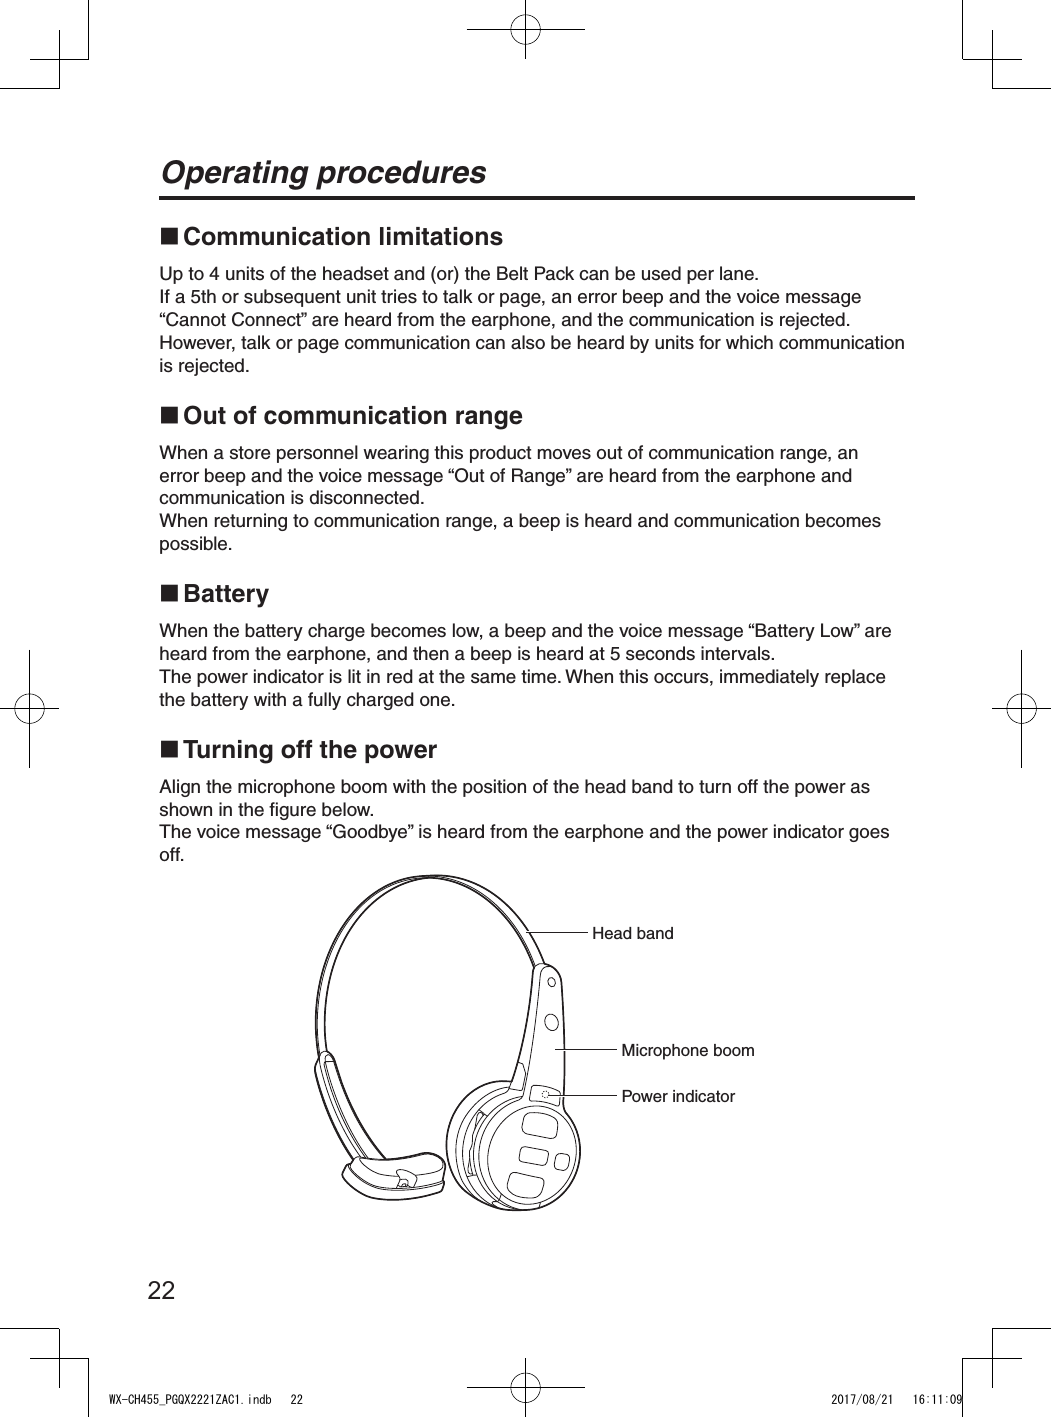 22Operating procedures Communication limitationsUp to 4 units of the headset and (or) the Belt Pack can be used per lane.If a 5th or subsequent unit tries to talk or page, an error beep and the voice message “Cannot Connect” are heard from the earphone, and the communication is rejected.However, talk or page communication can also be heard by units for which communication is rejected. Out of communication rangeWhen a store personnel wearing this product moves out of communication range, an error beep and the voice message “Out of Range” are heard from the earphone and communication is disconnected.When returning to communication range, a beep is heard and communication becomes possible. BatteryWhen the battery charge becomes low, a beep and the voice message “Battery Low” are heard from the earphone, and then a beep is heard at 5 seconds intervals.The power indicator is lit in red at the same time. When this occurs, immediately replace the battery with a fully charged one. Turning off the powerAlign the microphone boom with the position of the head band to turn off the power as shown in the figure below.The voice message “Goodbye” is heard from the earphone and the power indicator goes off.Power indicatorMicrophone boomHead bandWX-CH455_PGQX2221ZAC1.indb   22 2017/08/21   16:11:09